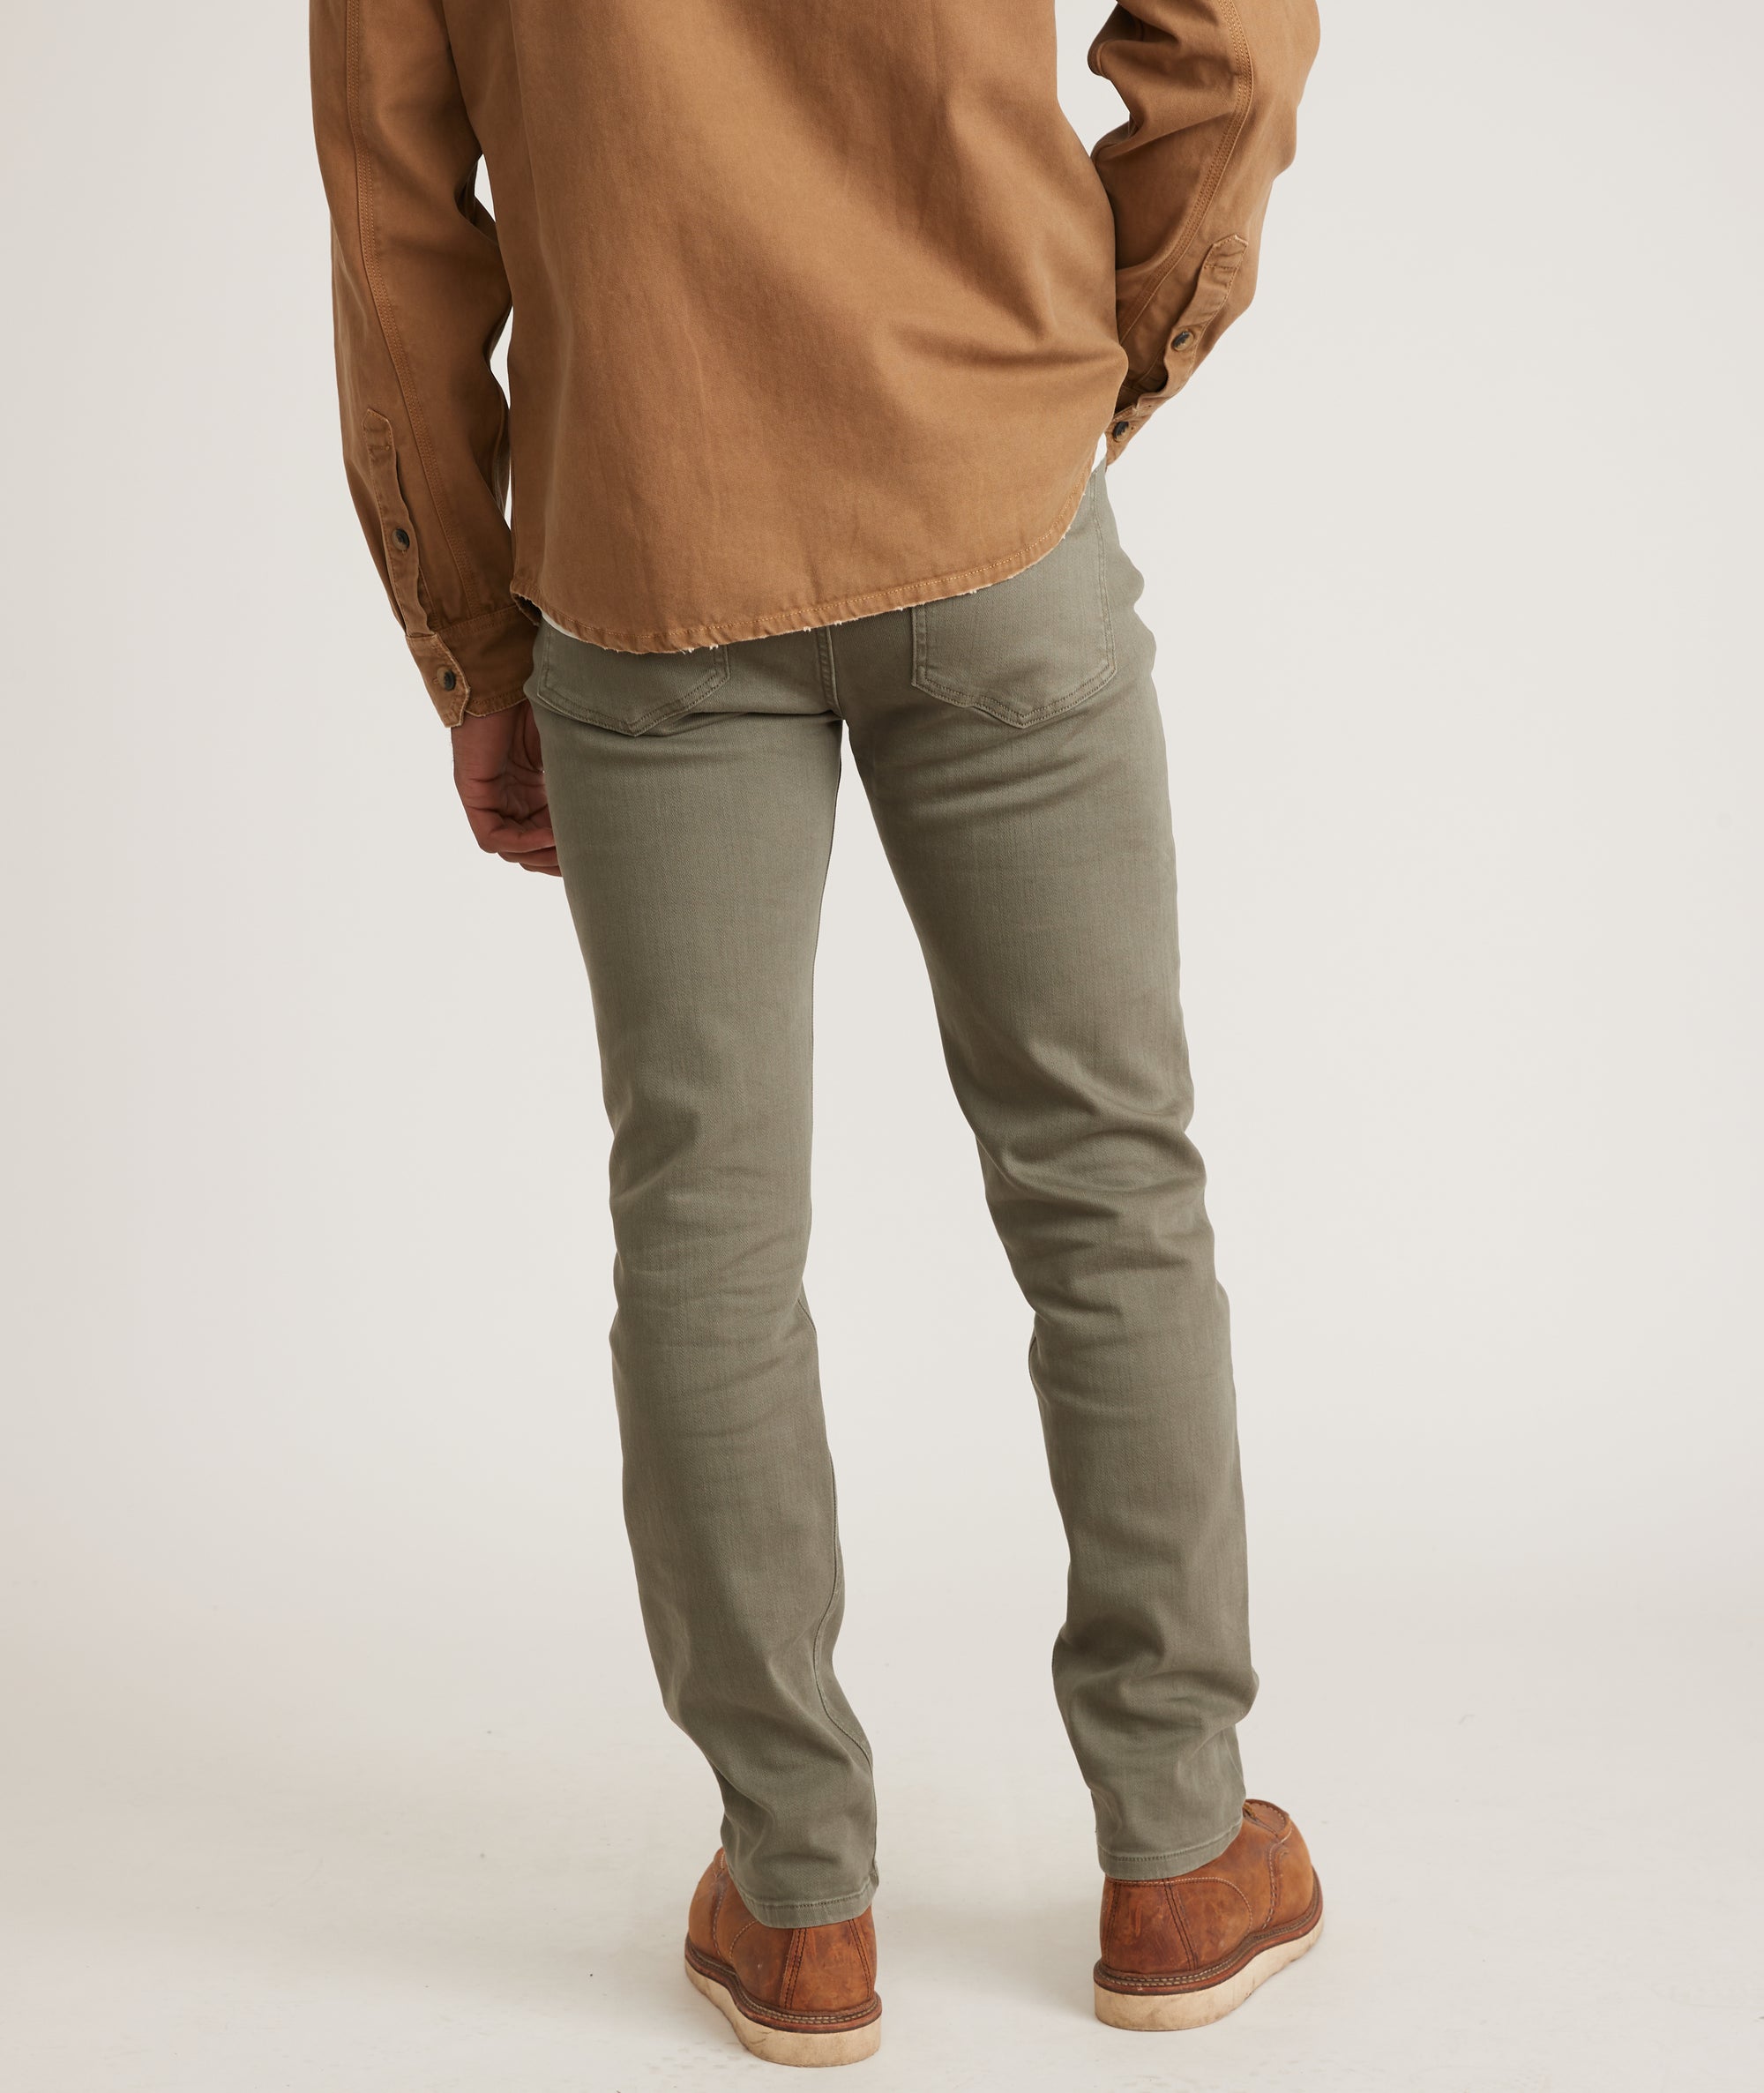 5 Pocket Pant Slim Fit – Layer Marine in Faded Olive